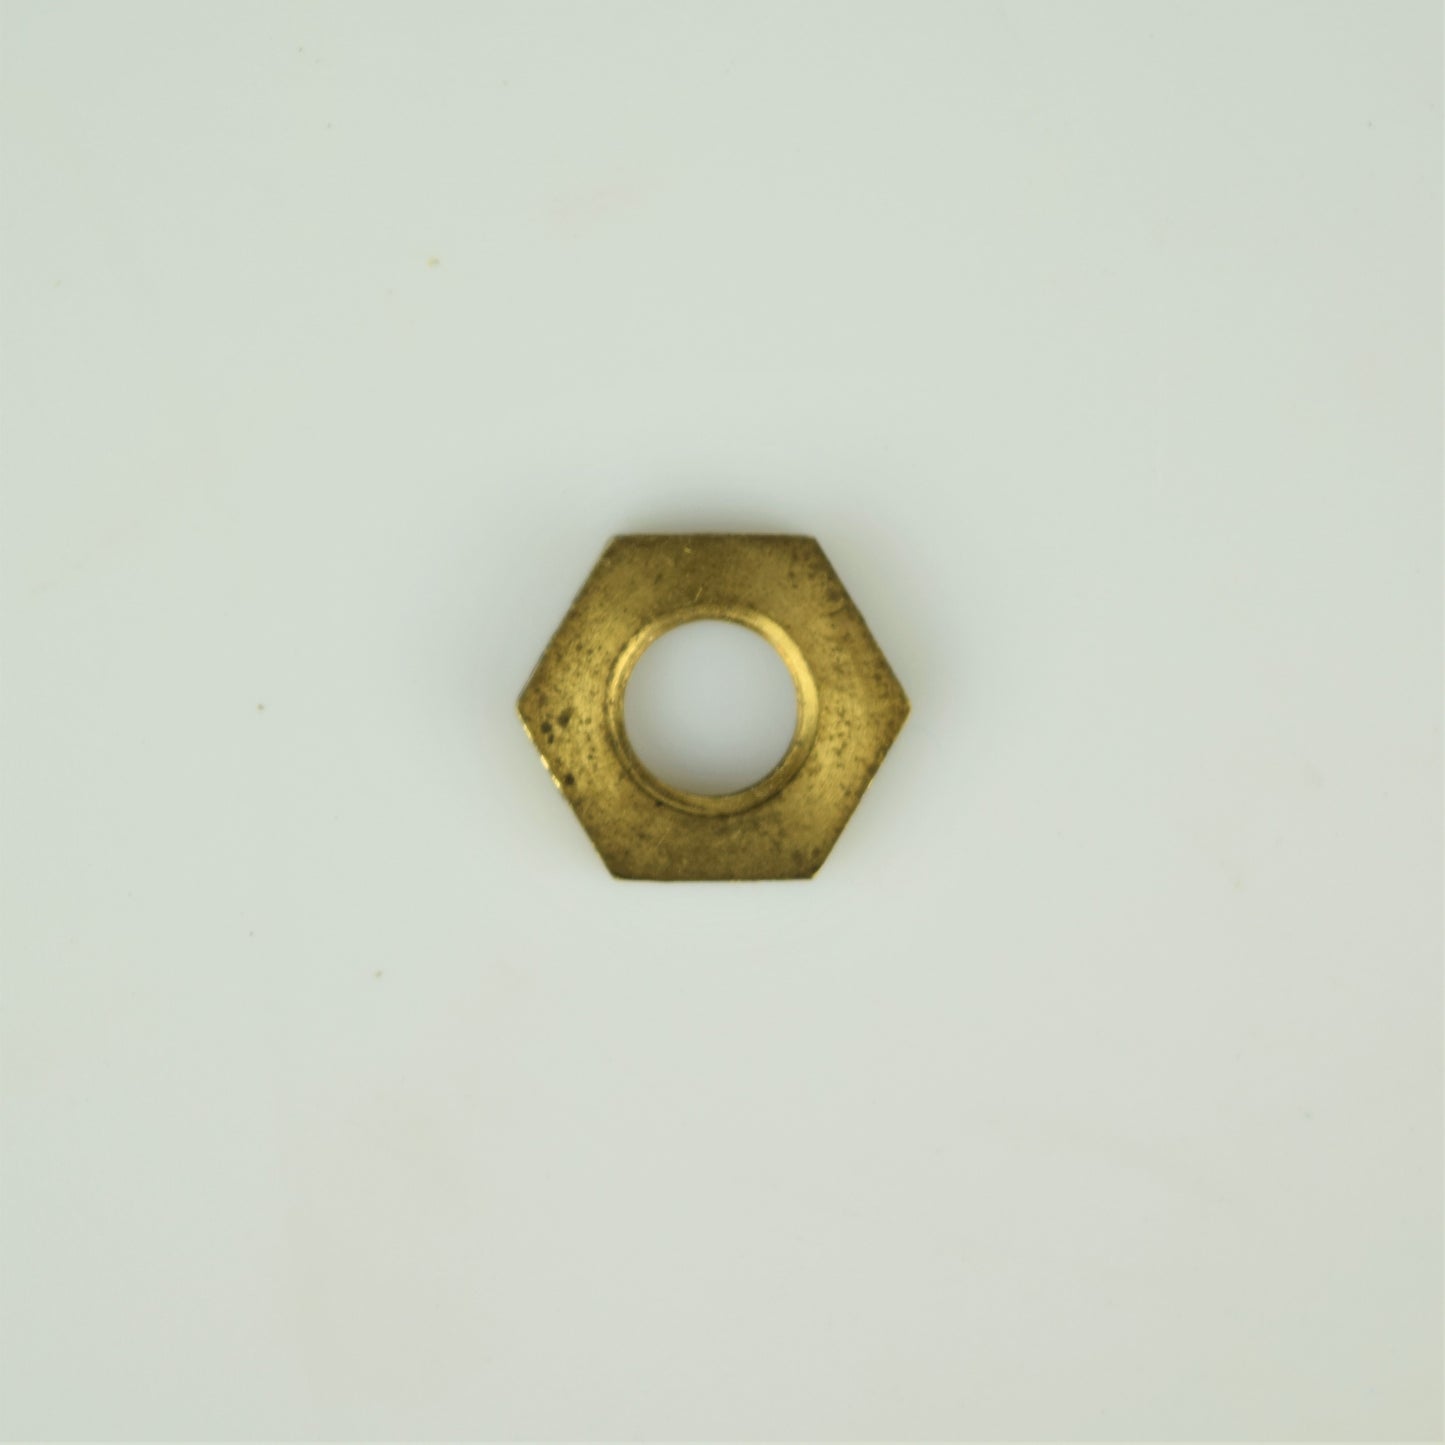 Western Electric Dial Nut for No. 2,4,5 or 6 dials